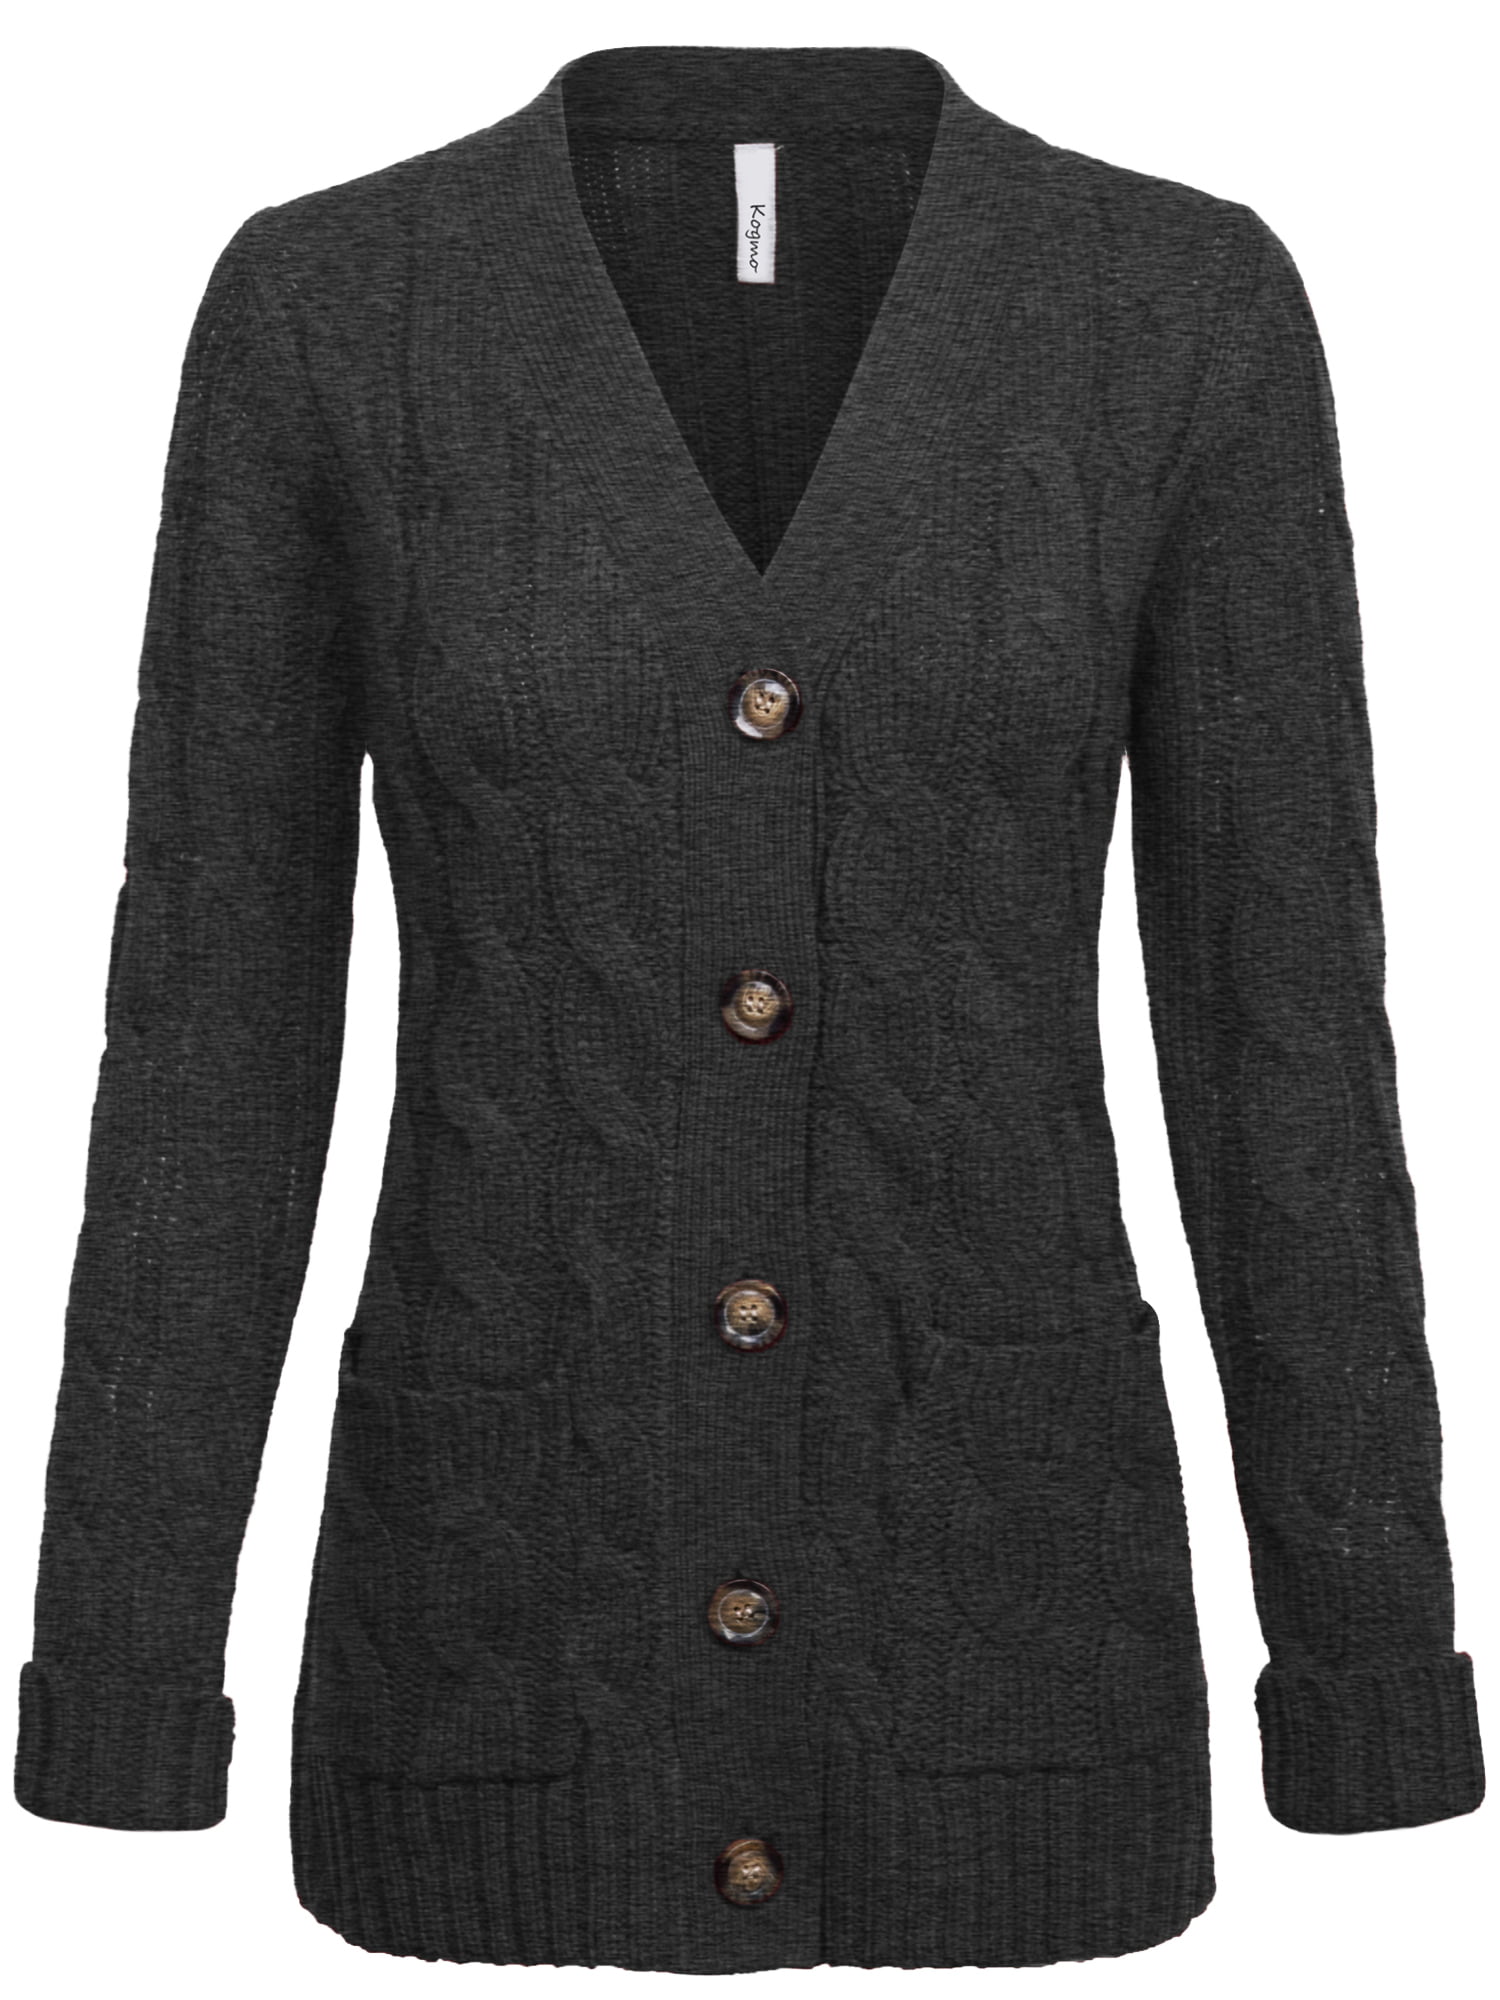 KOGMO Women's Cable Knit Sweater Cardigans with Buttons and Pockets ...